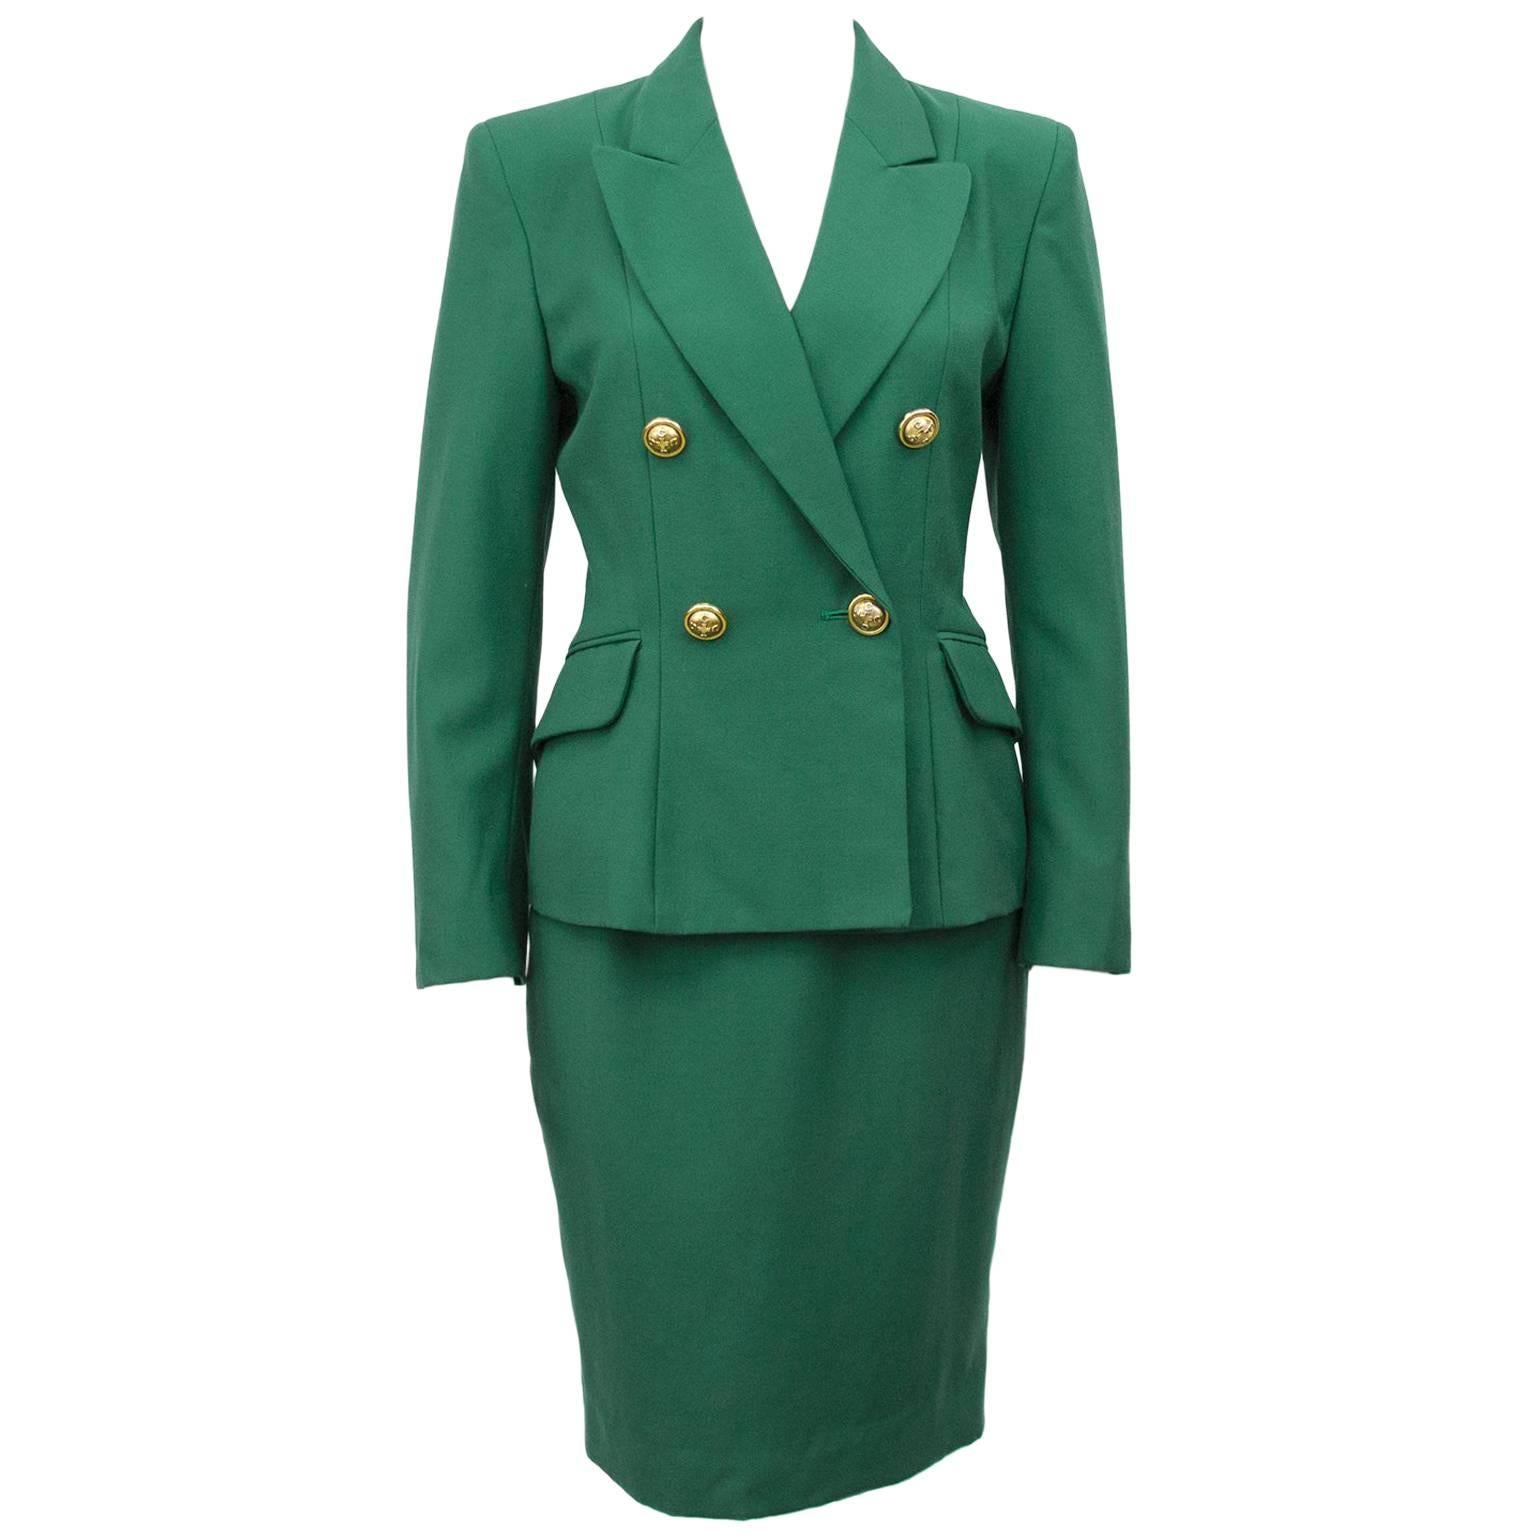 1980s Moschino Cheap and Chic Kelly Green Wool Skirt Suit 